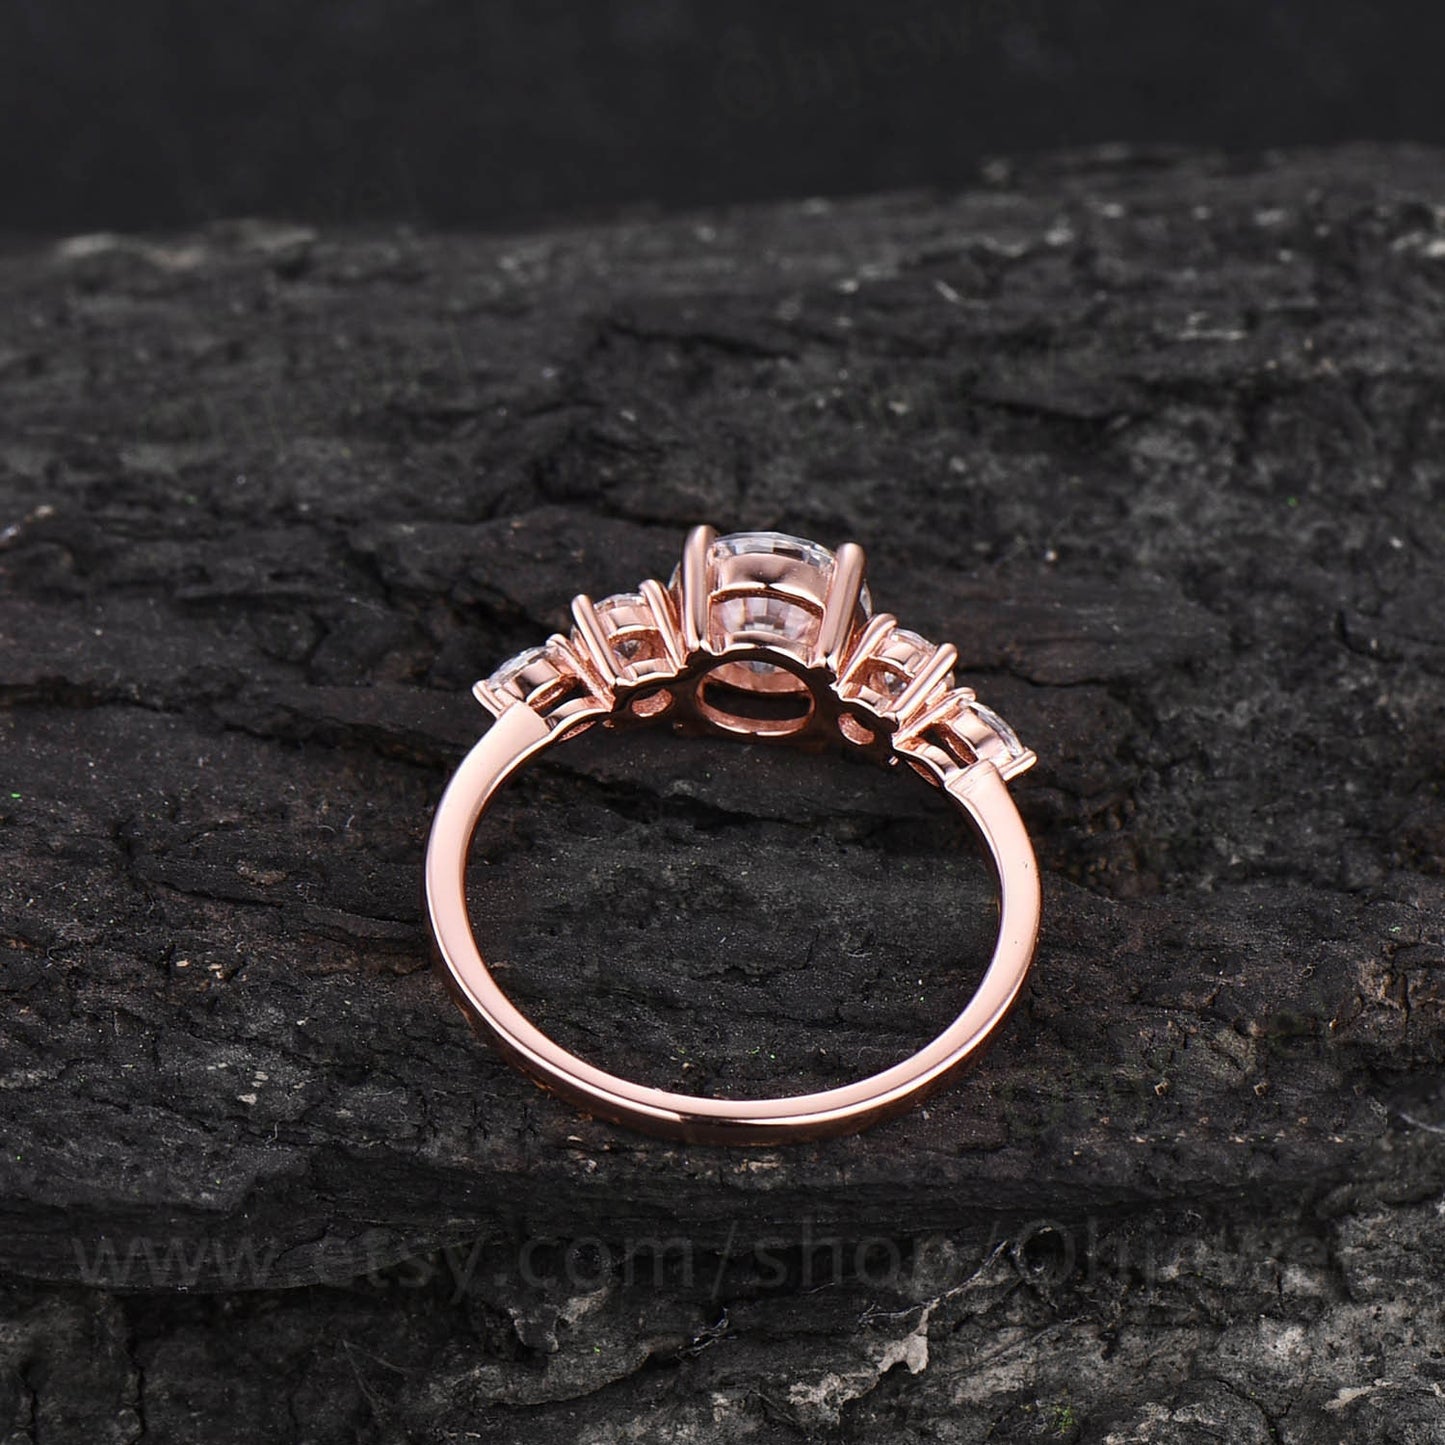 Unique 1ct moissanite engagement ring art deco vintage five stone moissanite ring for women minimalist rose gold silver bridal wedding ring